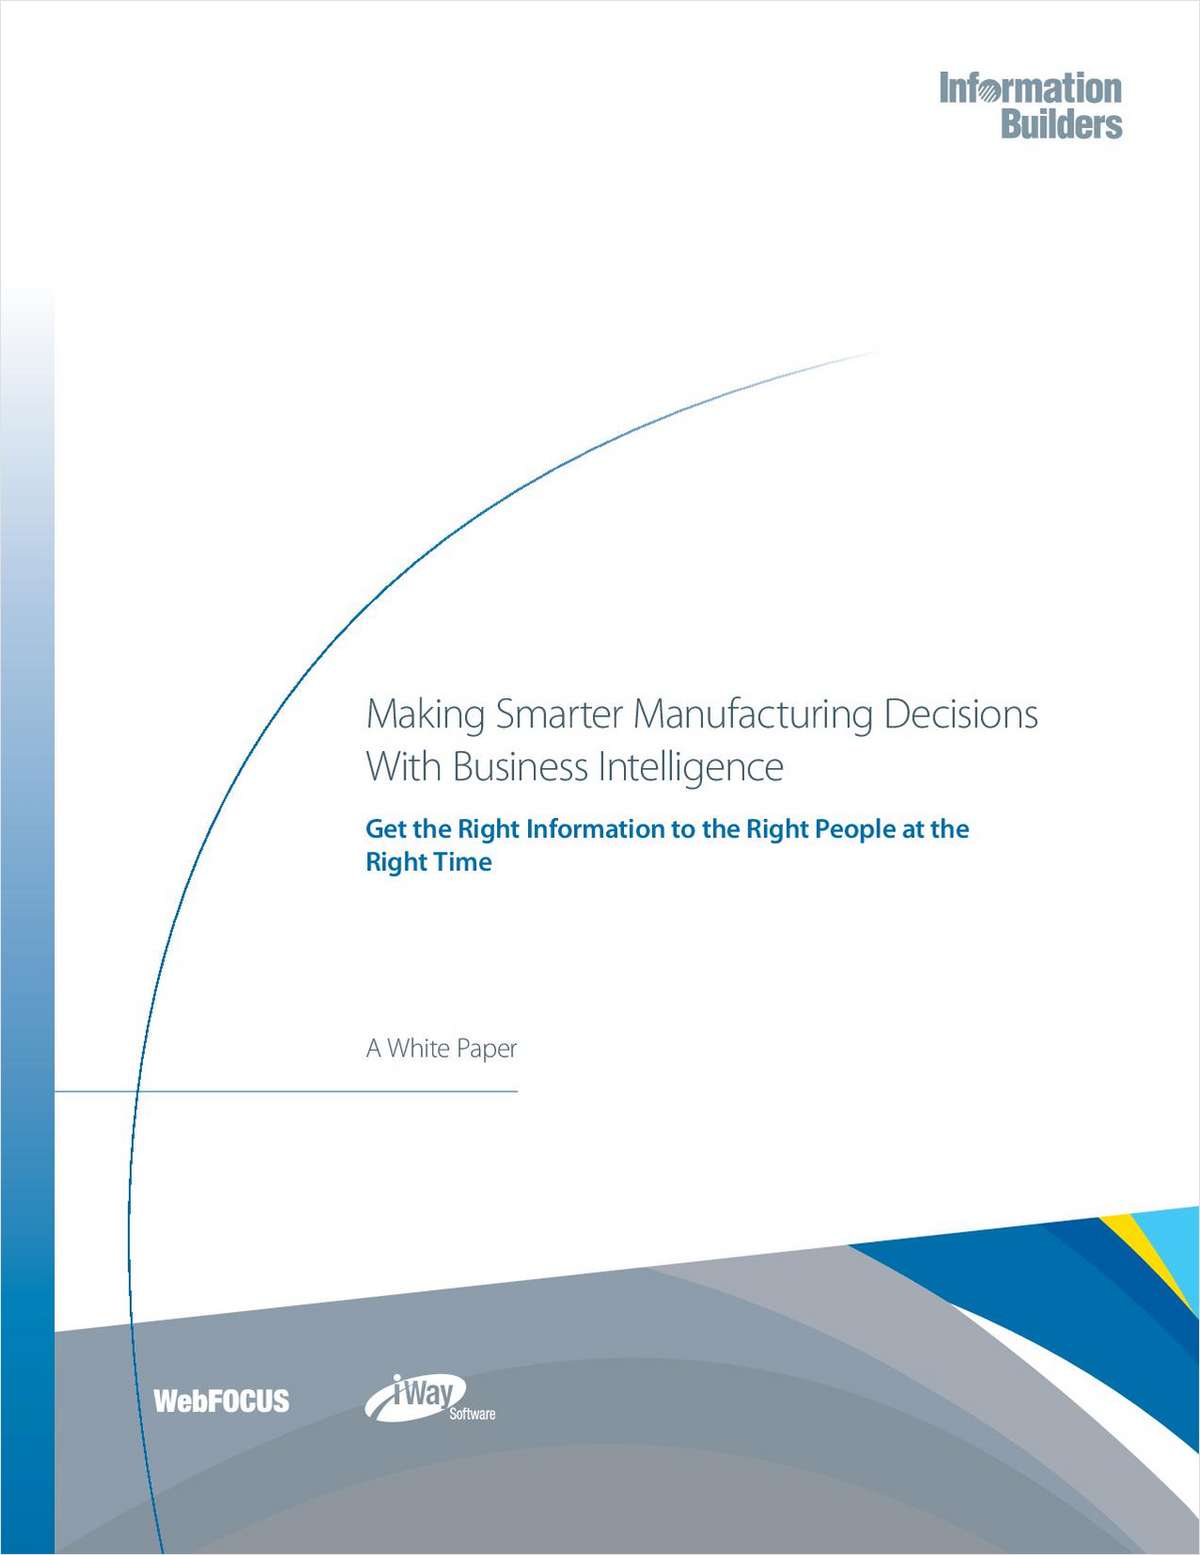 Making Smarter Manufacturing Decisions With Business Intelligence